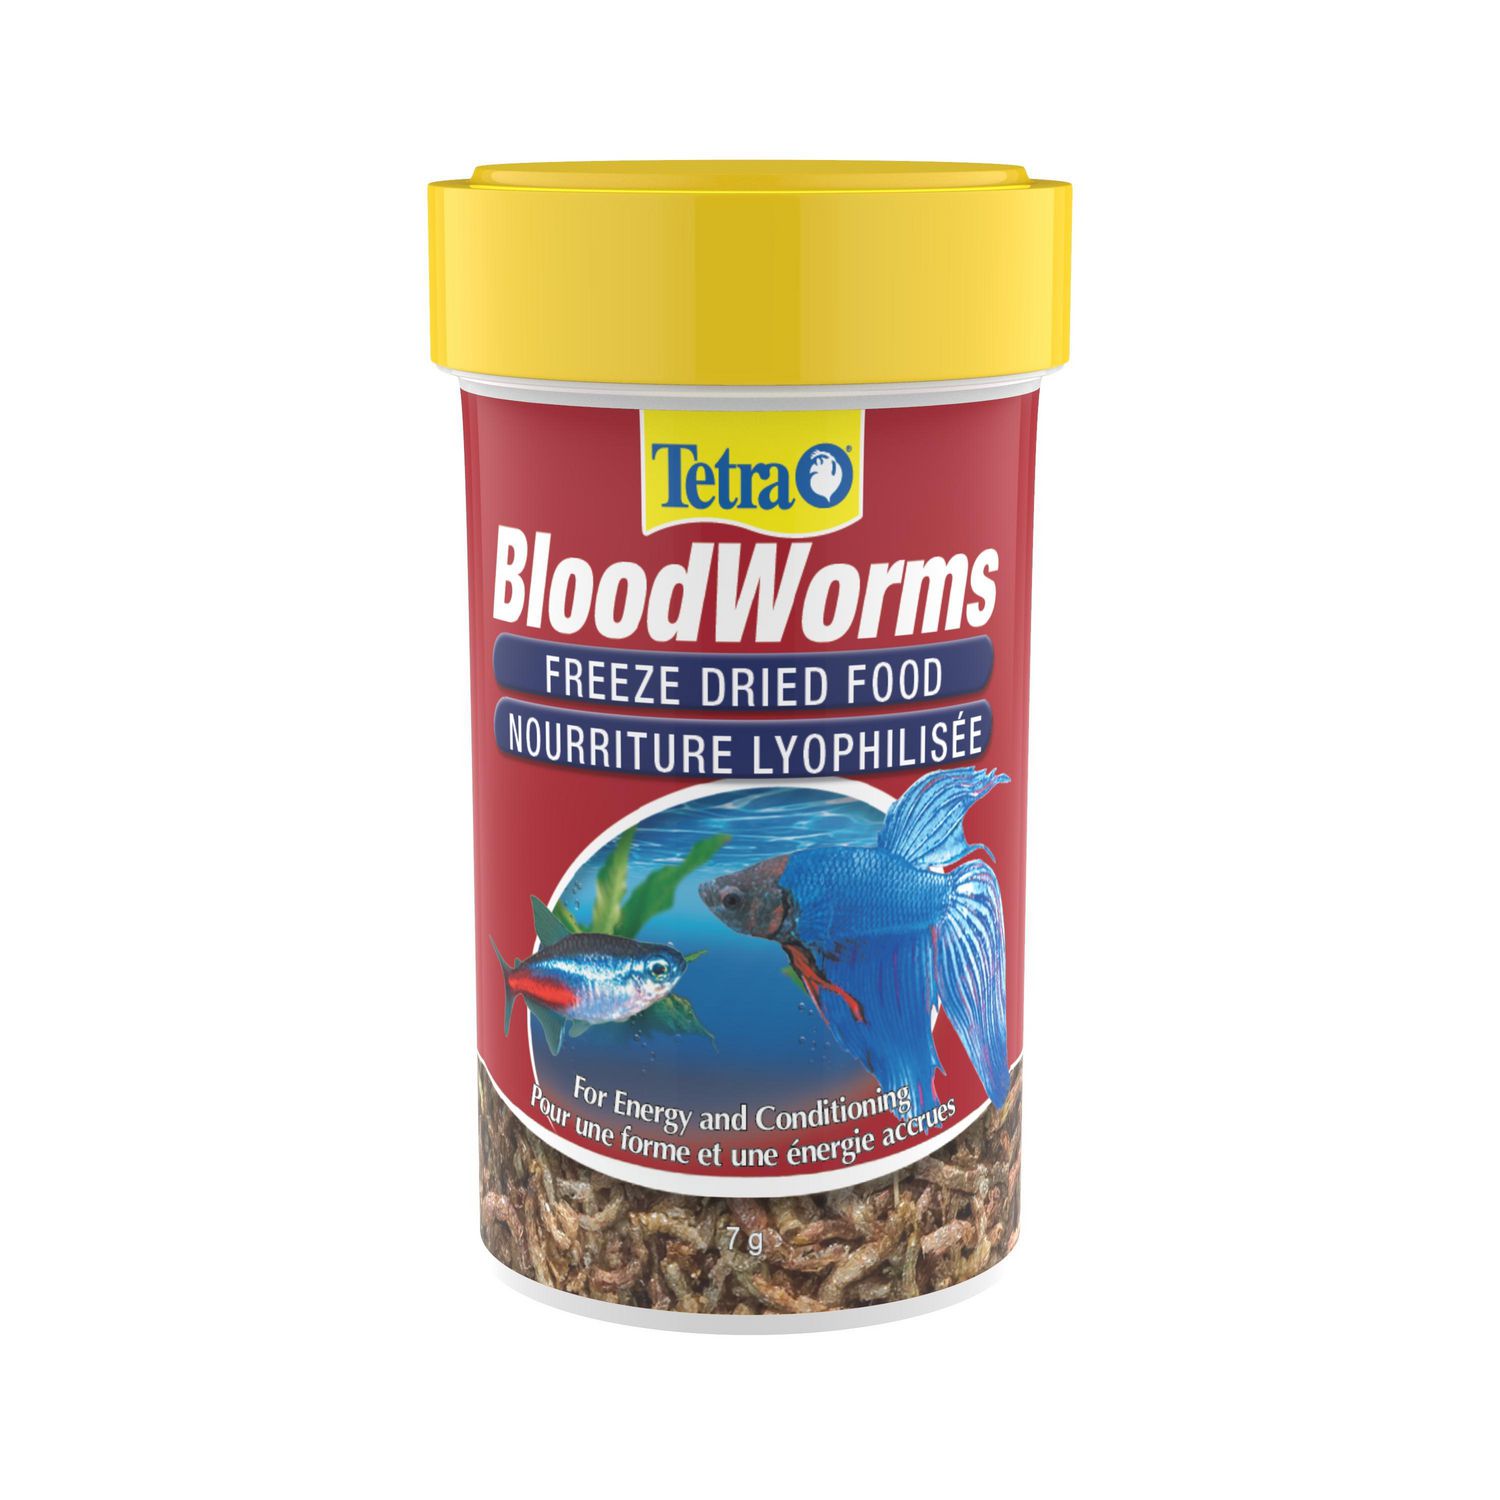 Tetra BloodWorms Freeze Dried Fish Food Treats, For energy and